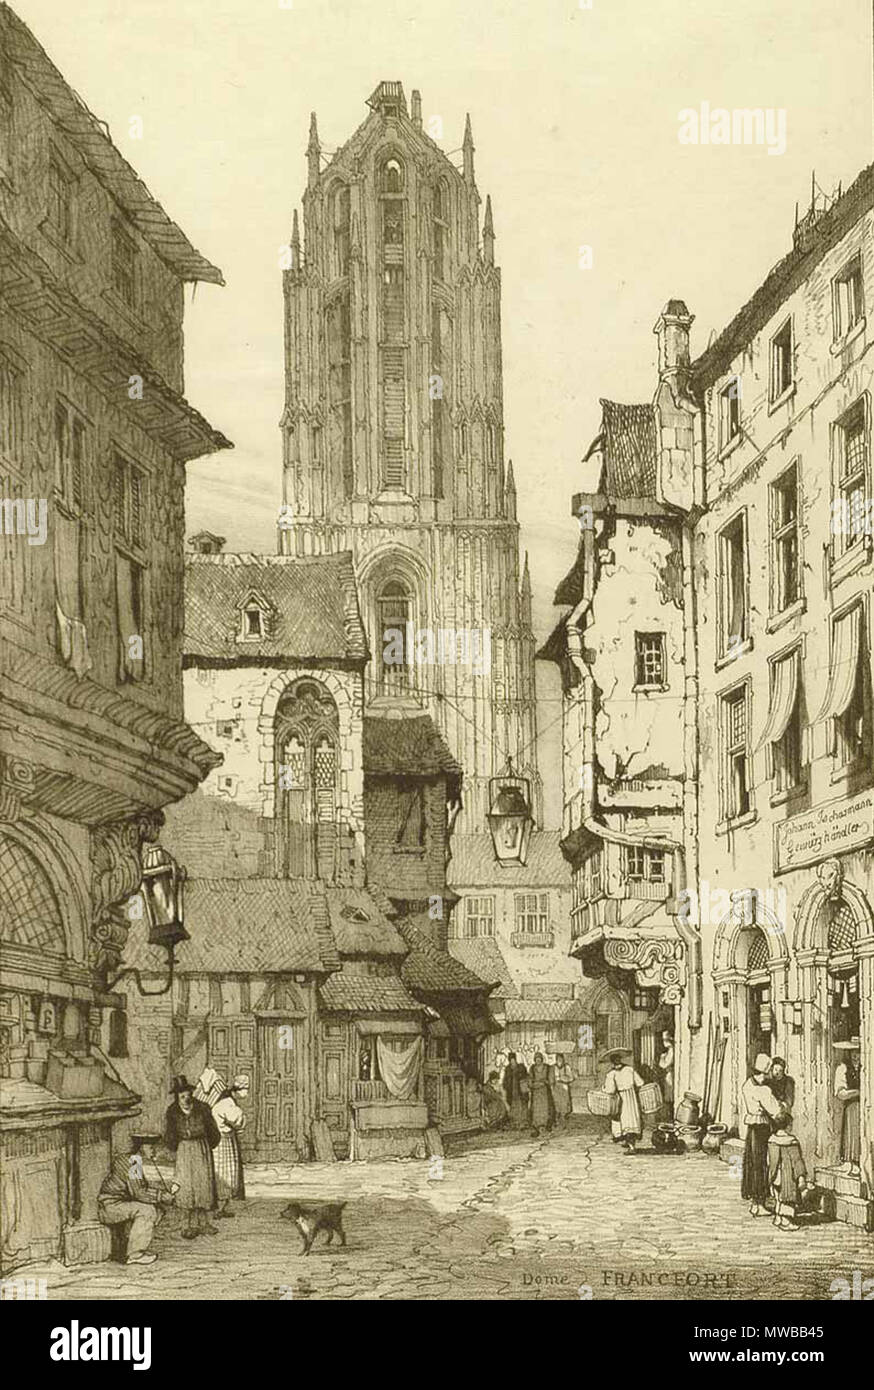 . 'Dome Francfort'. Lithograph by S. Prout, c. 1850. circa 1850. Template:Samel Prout 217 Frankfurt Dom 19 Jh Stock Photo